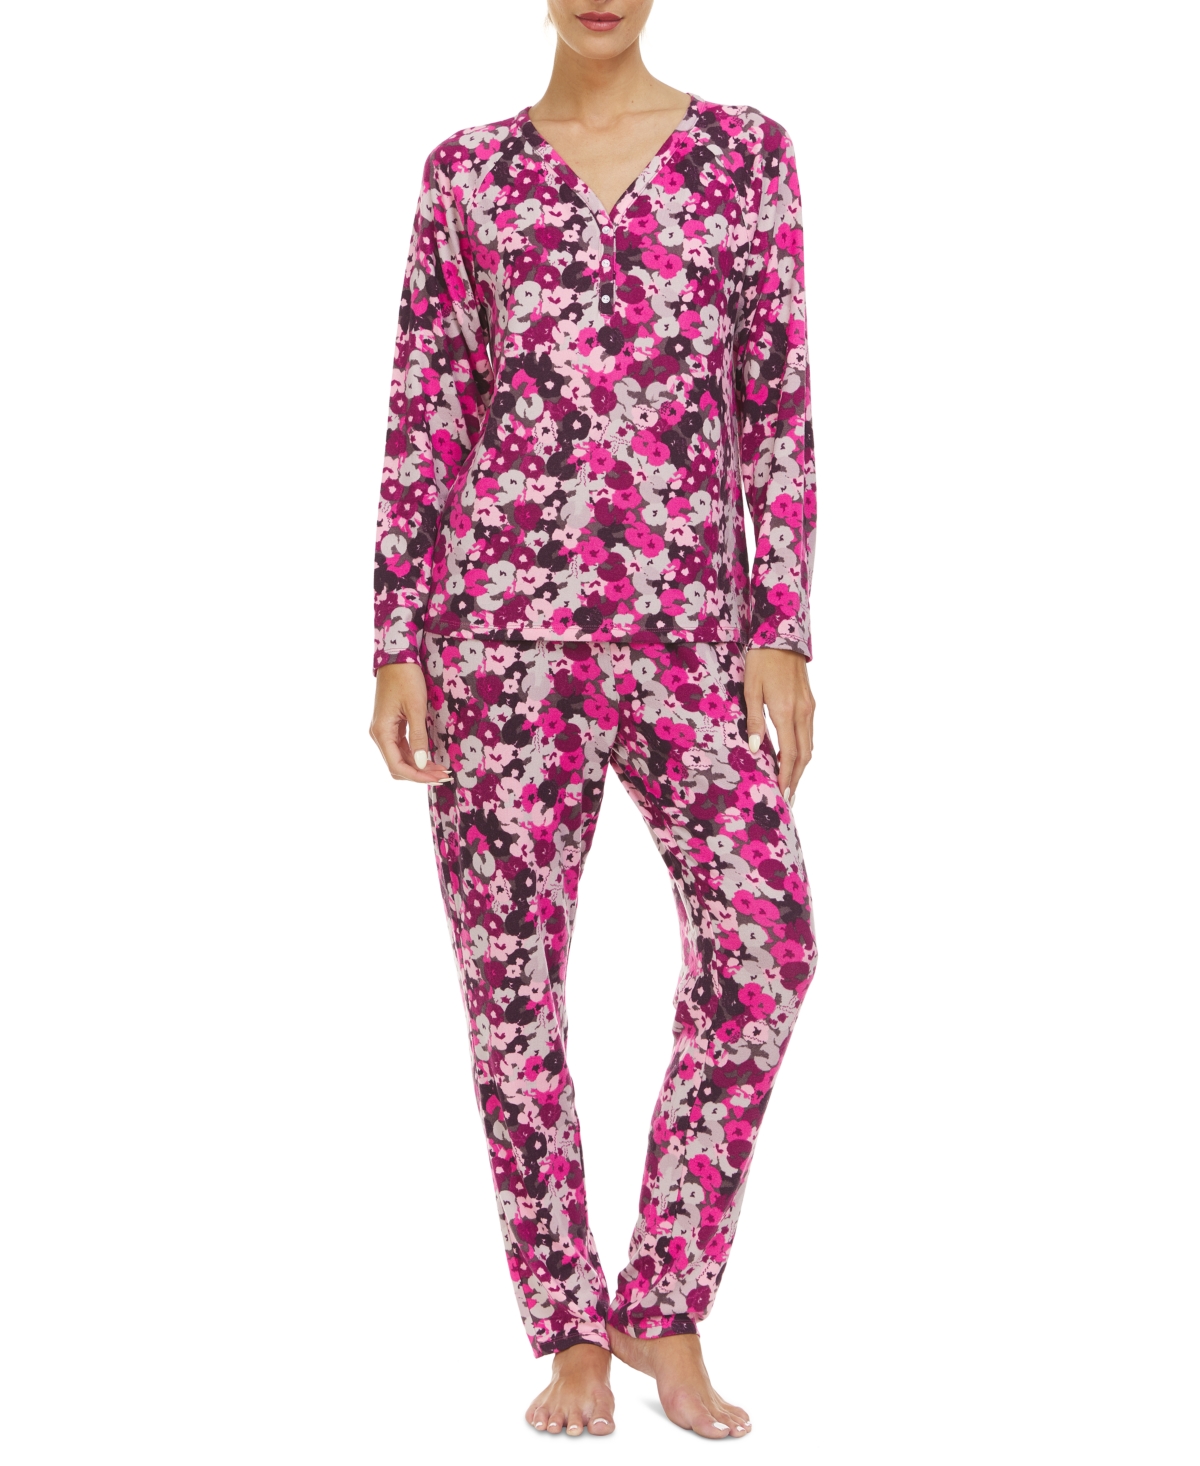 Flora by Flora Nikrooz Women's Colby Sweater Knit Pajamas Set